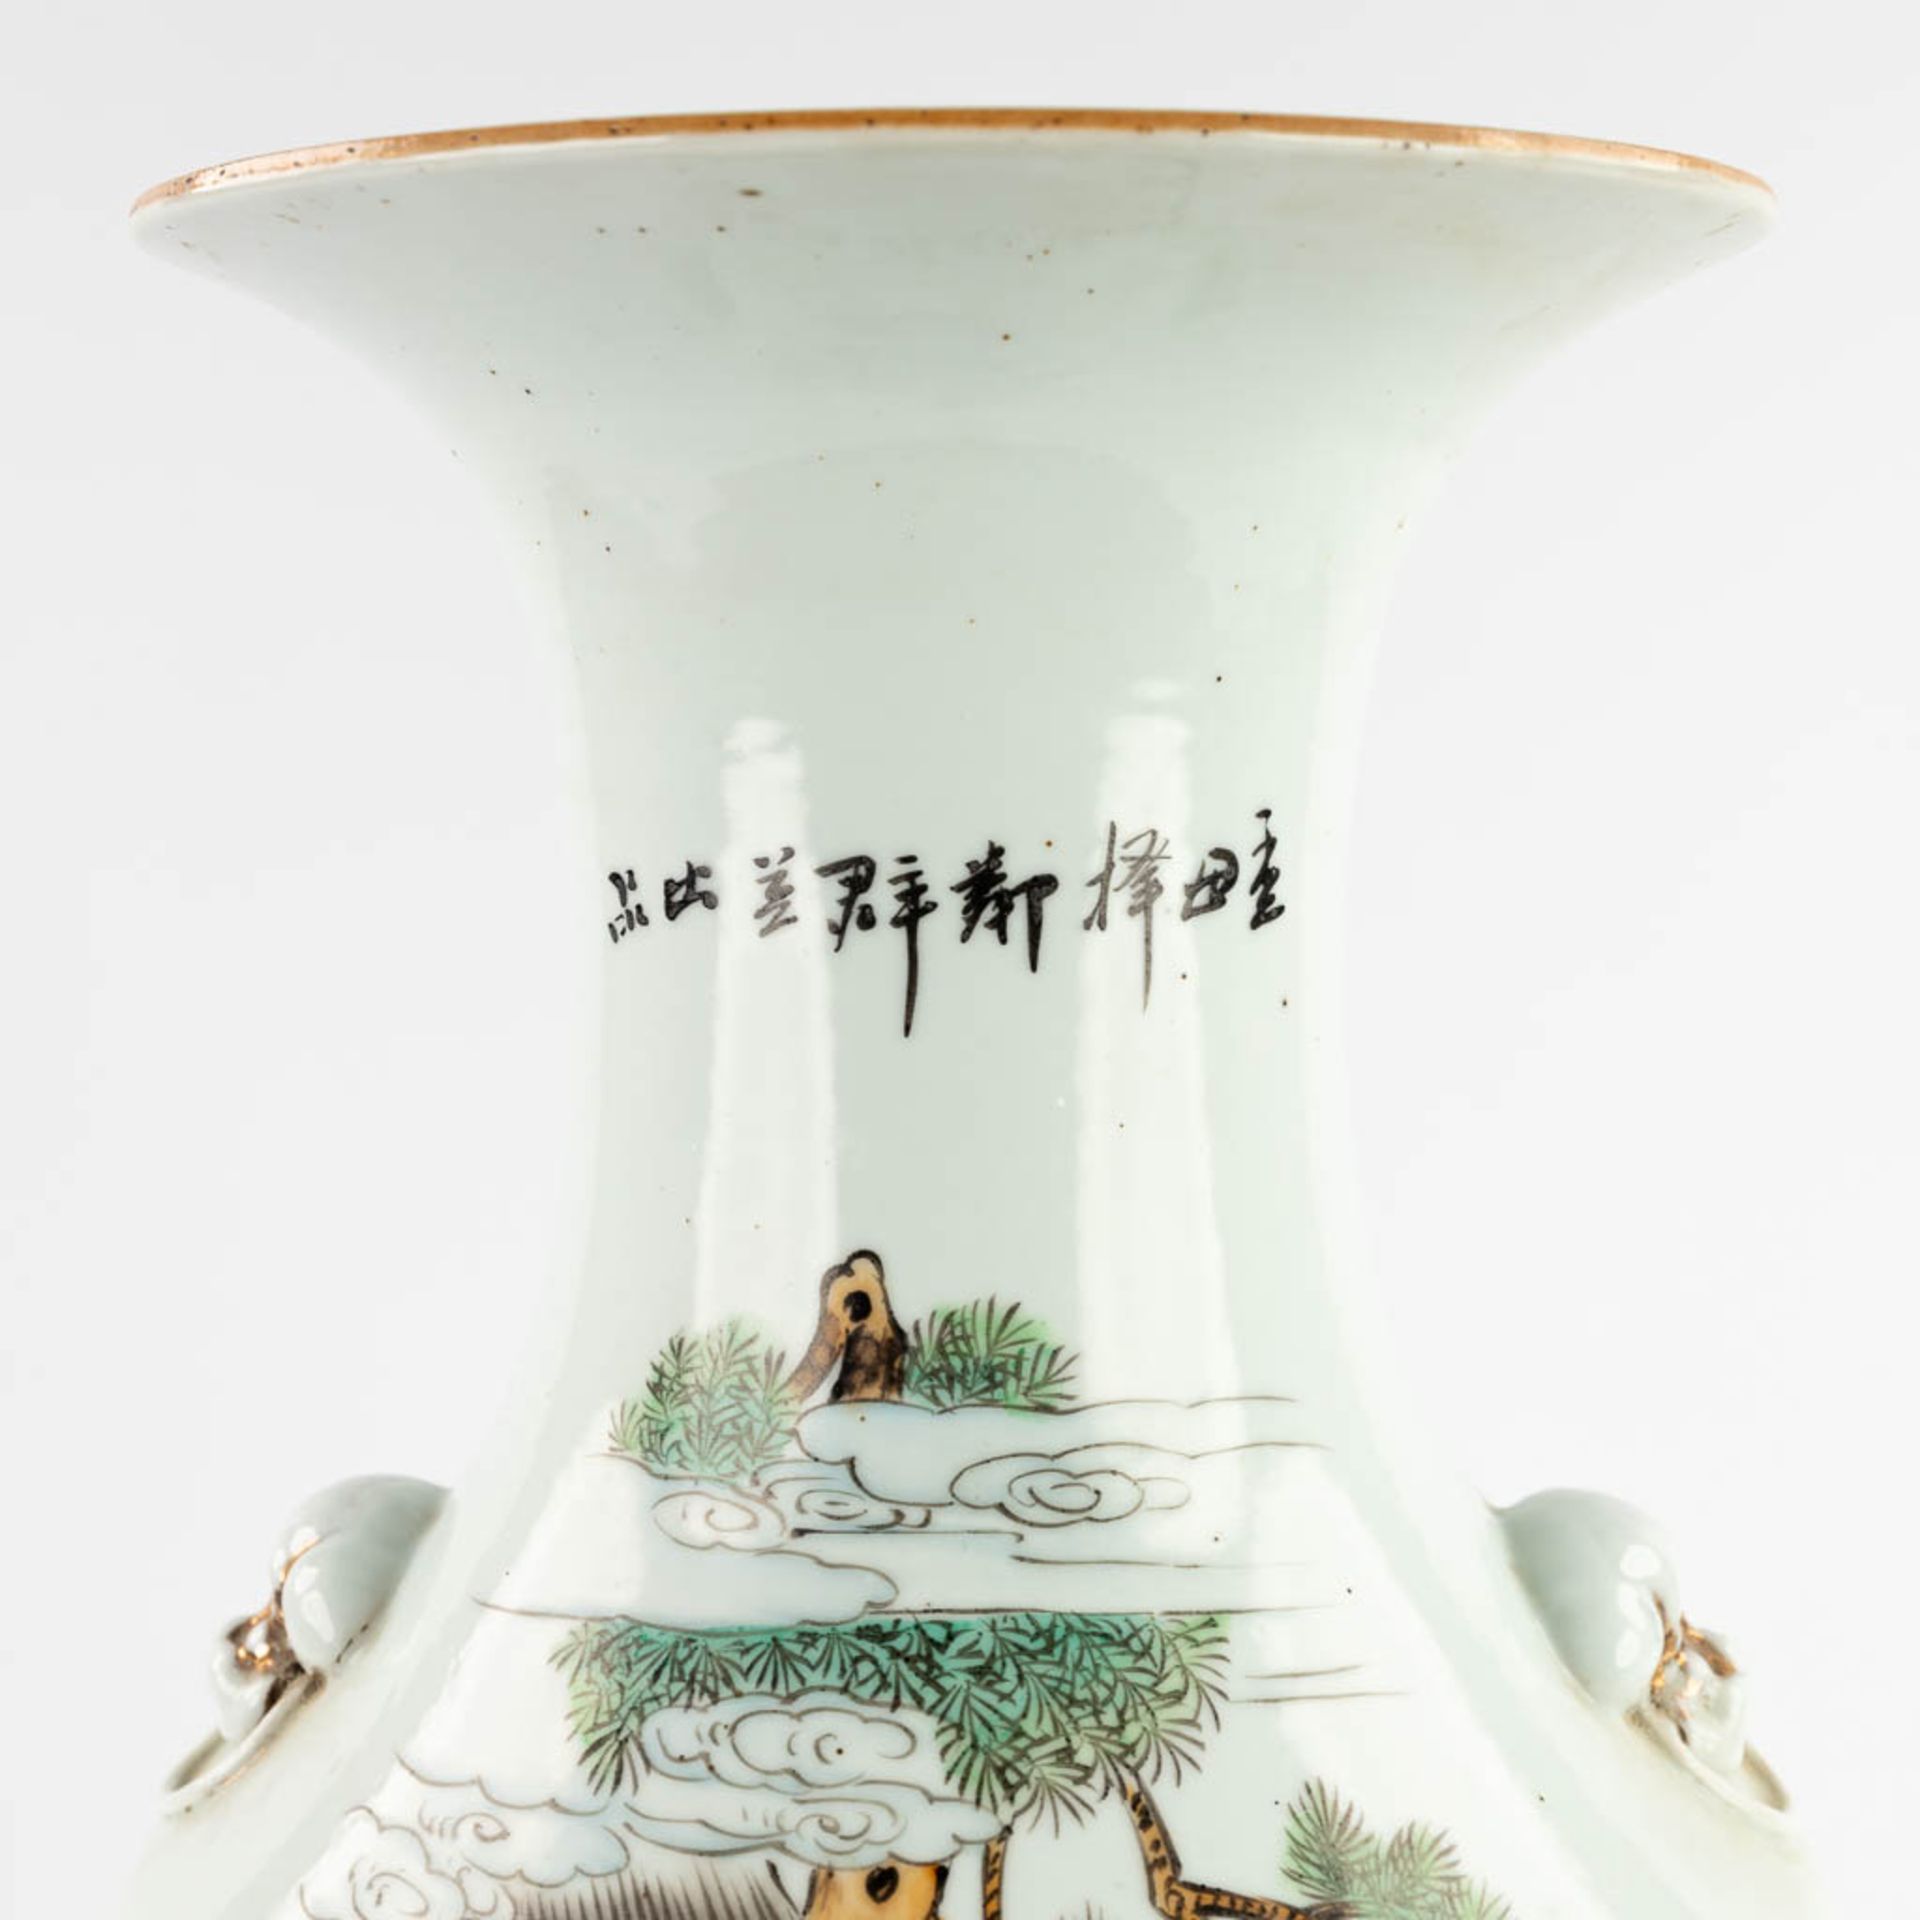 A Chinese vase, decorated with figurines in a garden. 19th/20th C. (H:57 x D:23 cm) - Bild 10 aus 15